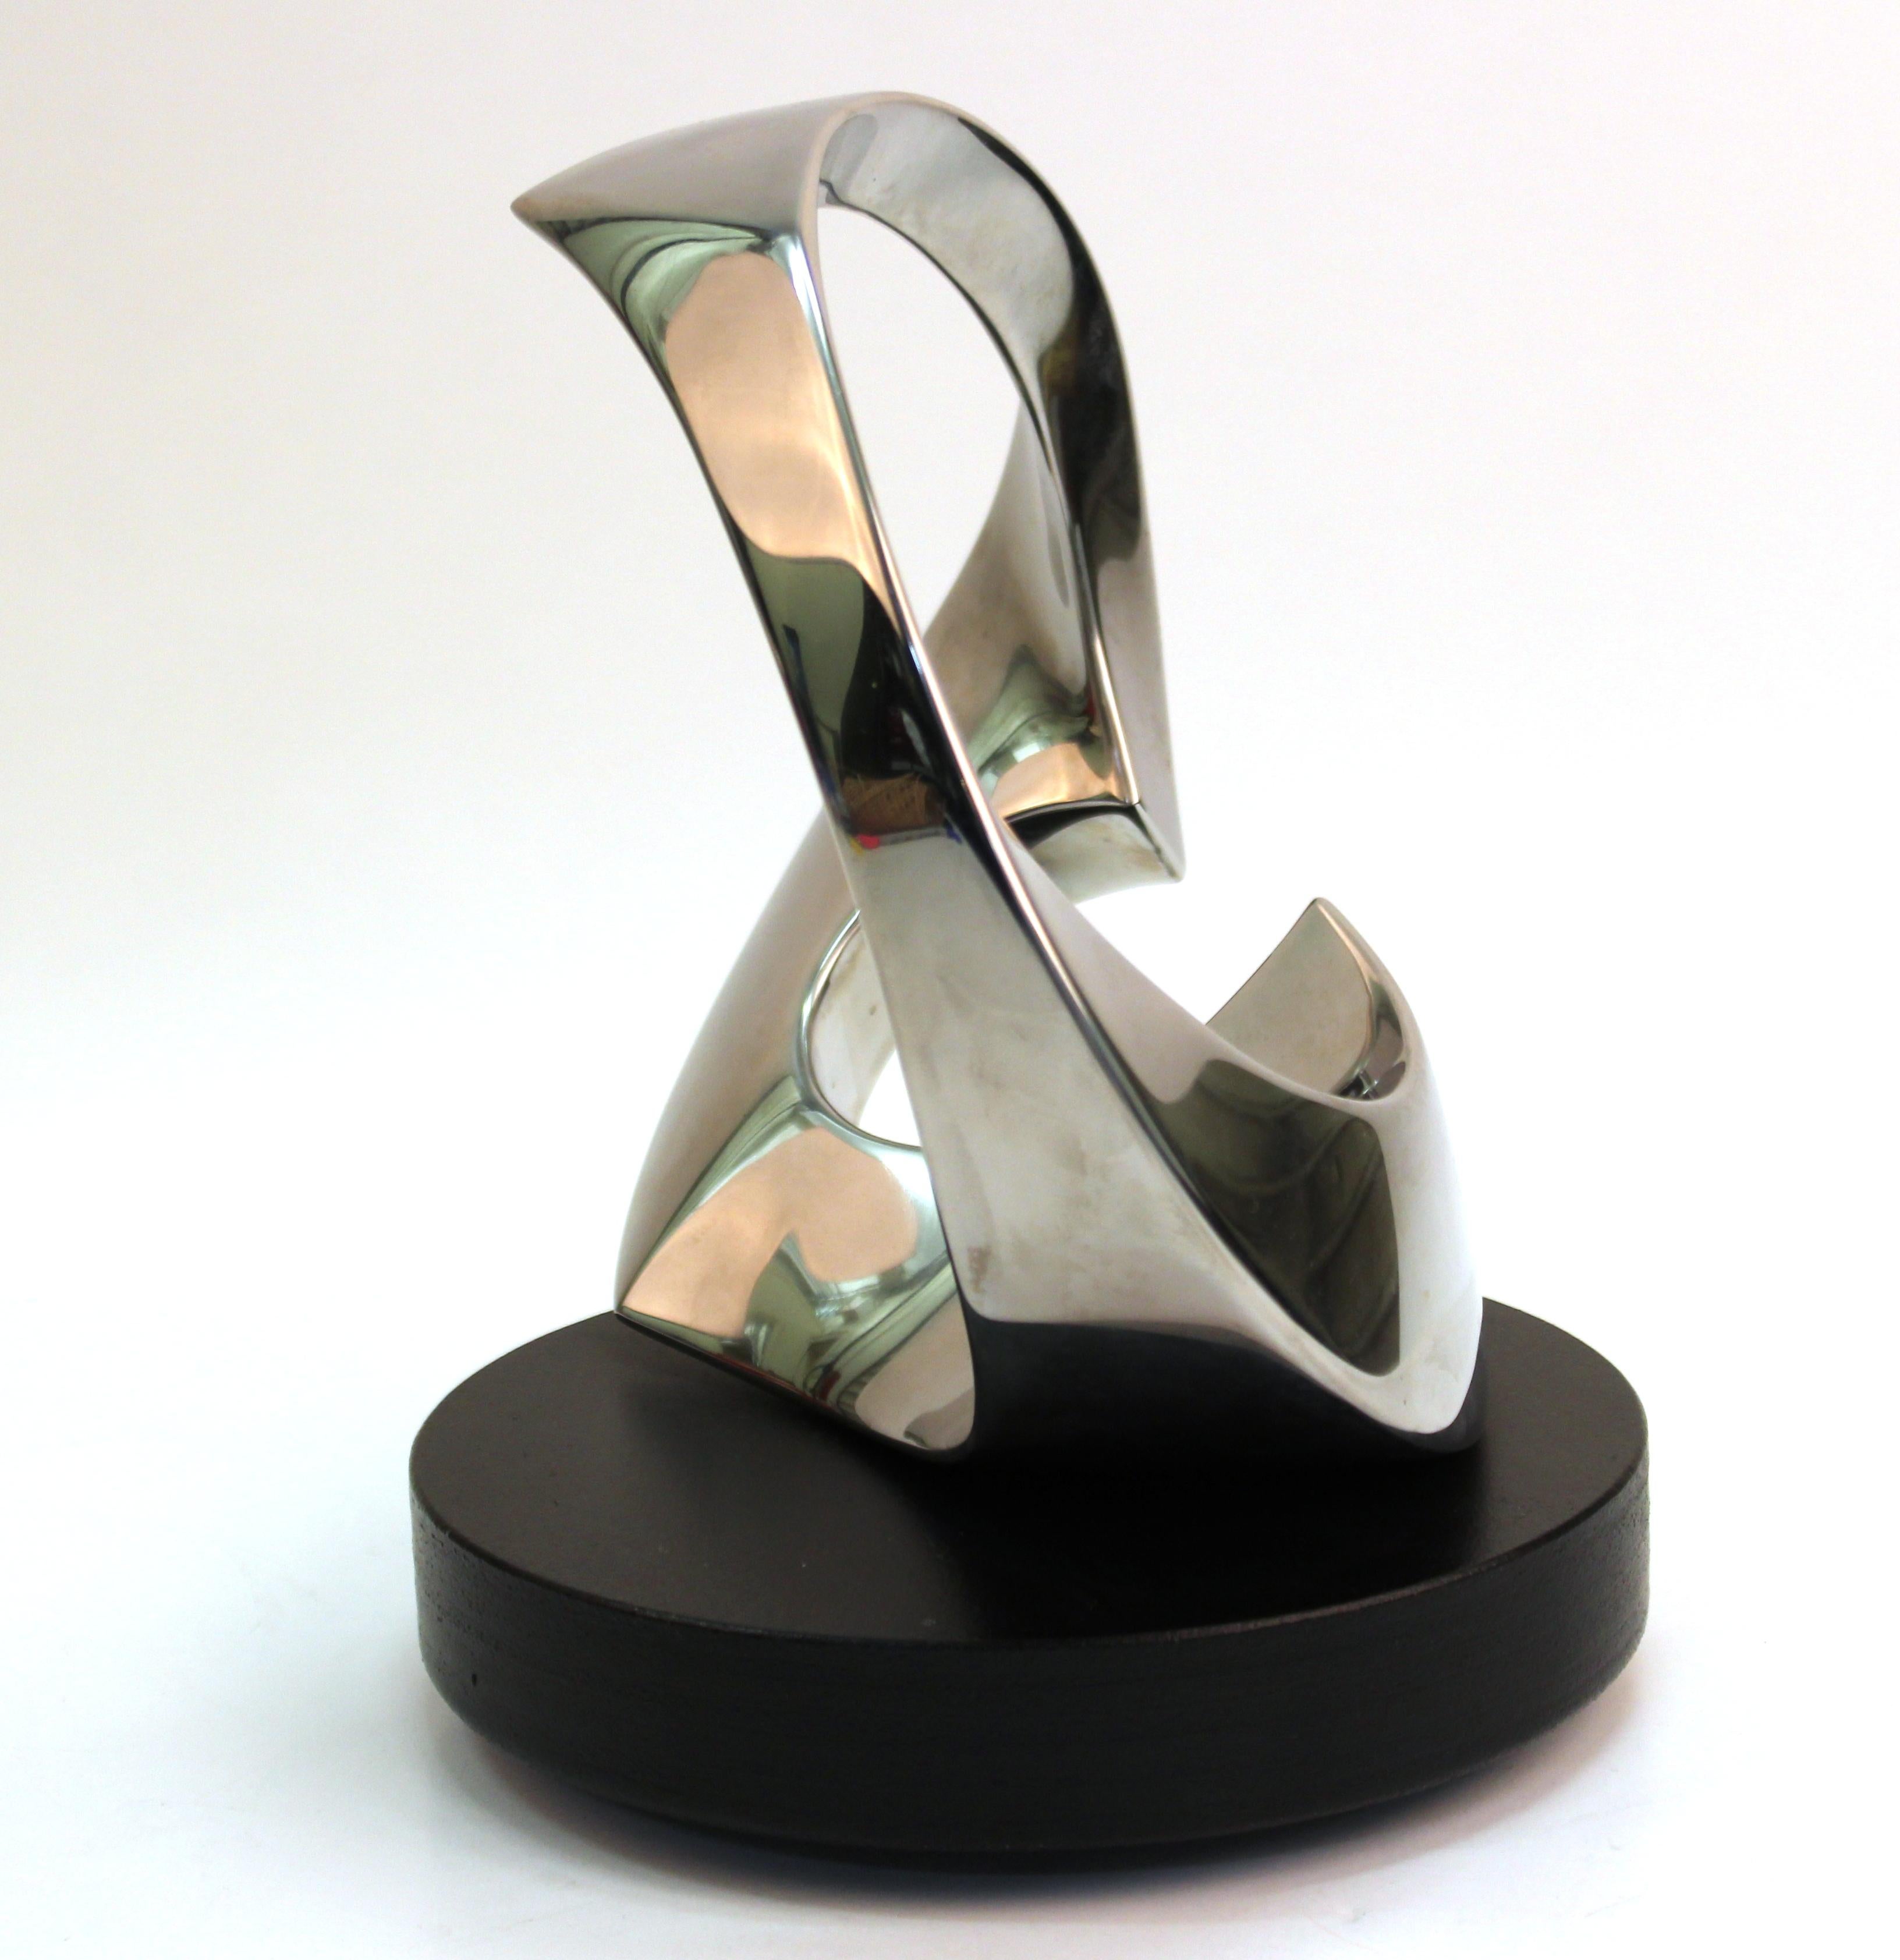 Modern metal abstract sculpture by Todd Reuben, on rotating base, marked 'Sculpture 56'. Marked on the base 'Sculpture 56 - Todd Reuben - 9 6 96'. The piece is in great vintage condition with age-appropriate wear.